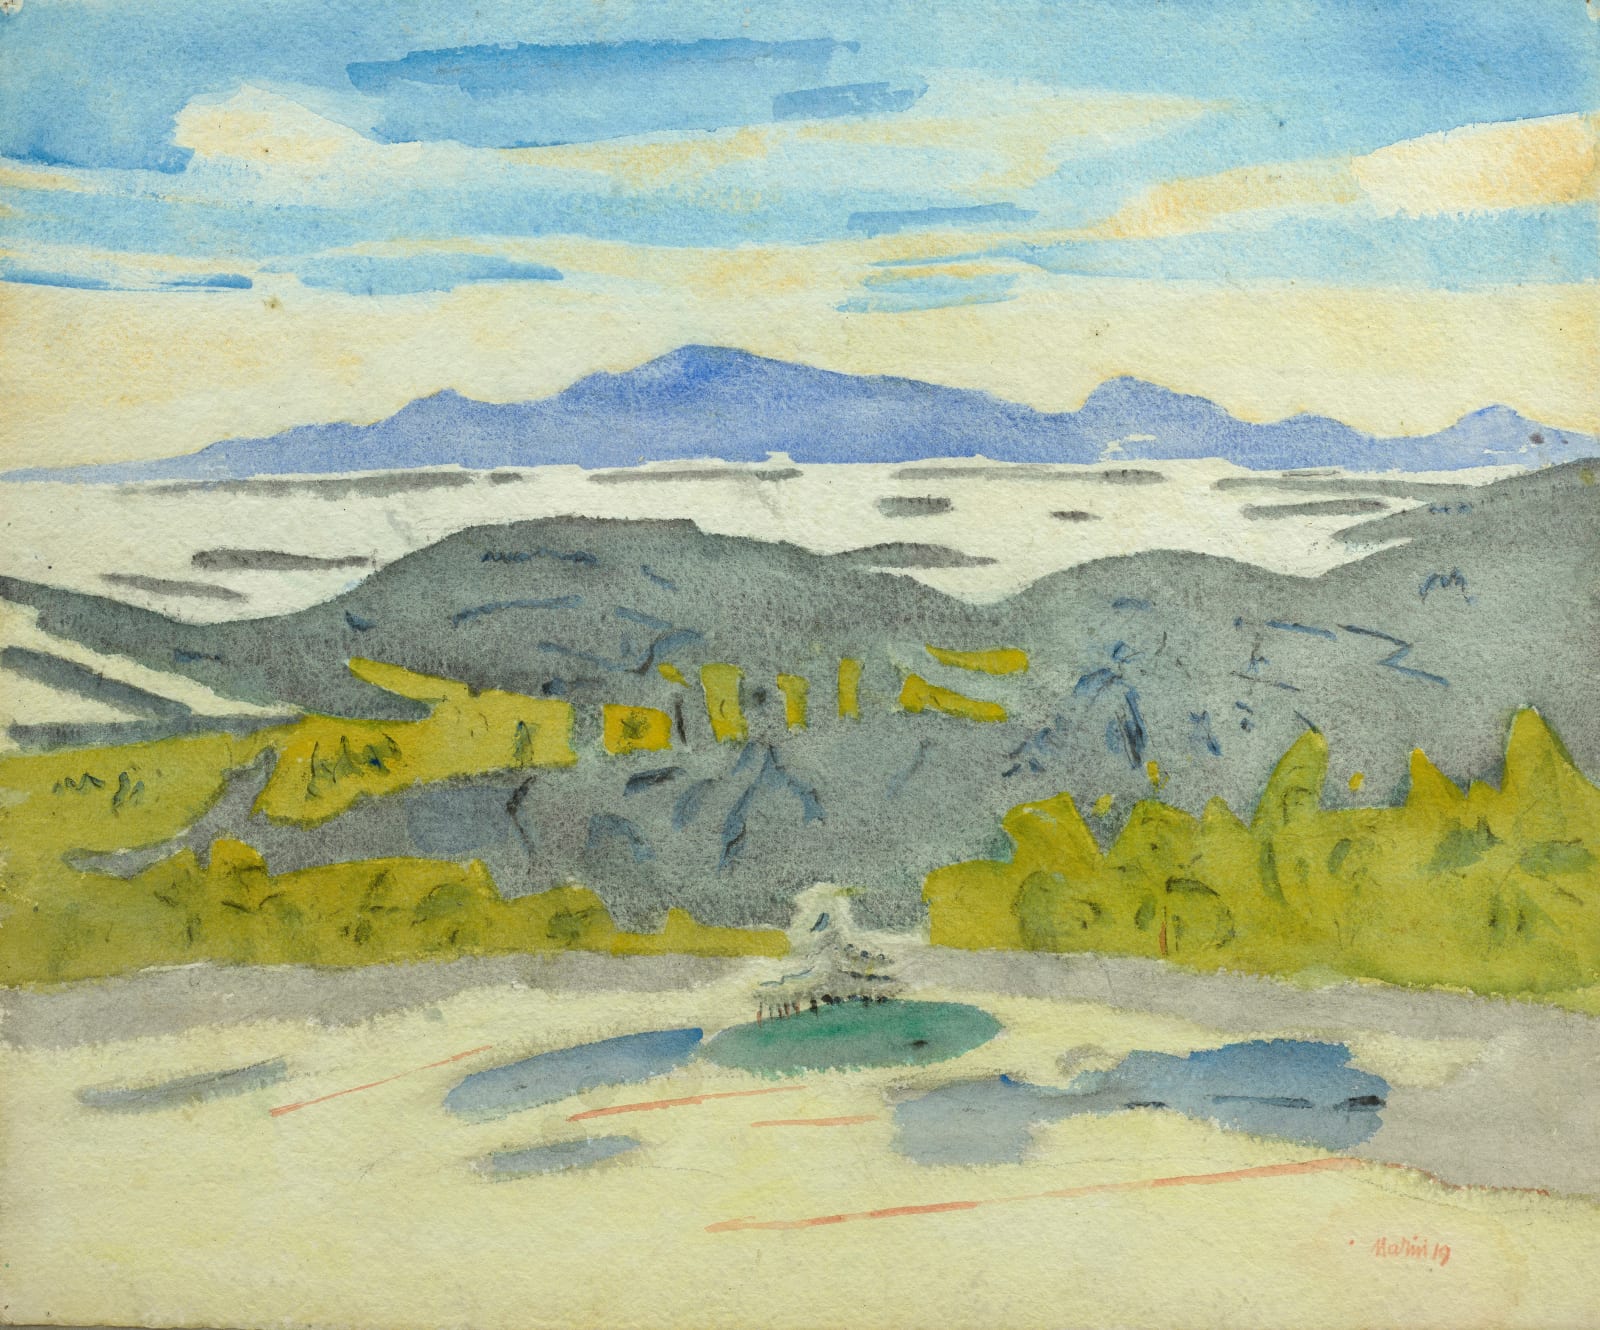 John Marin, Islands Looking Out from Deer Isle, Maine No. 2, 1919